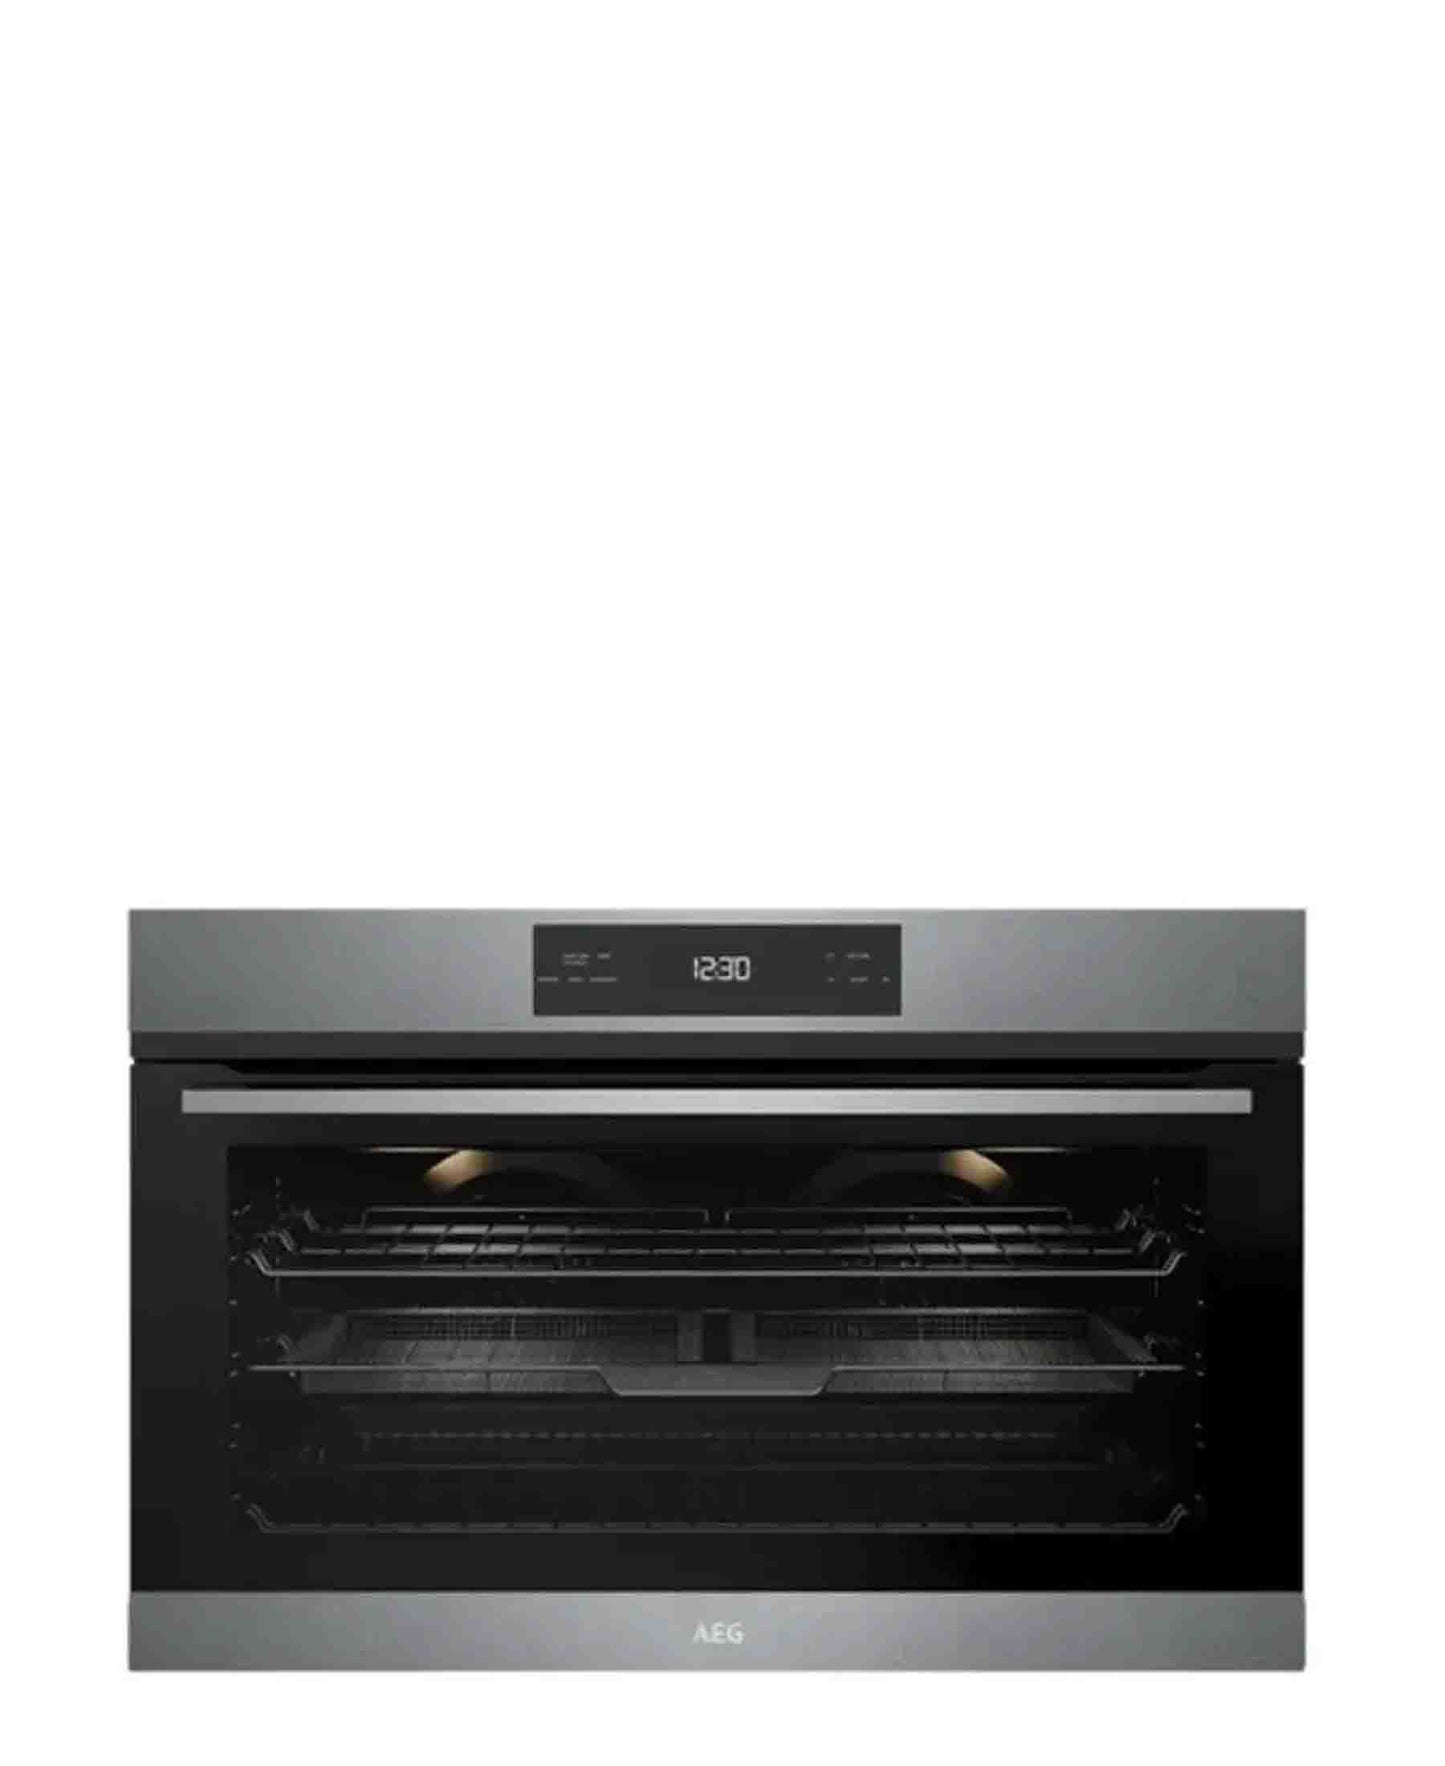 AEG 90cm 6000 Series Built-In Airfryer Oven 125L - Black & Stainless Steel